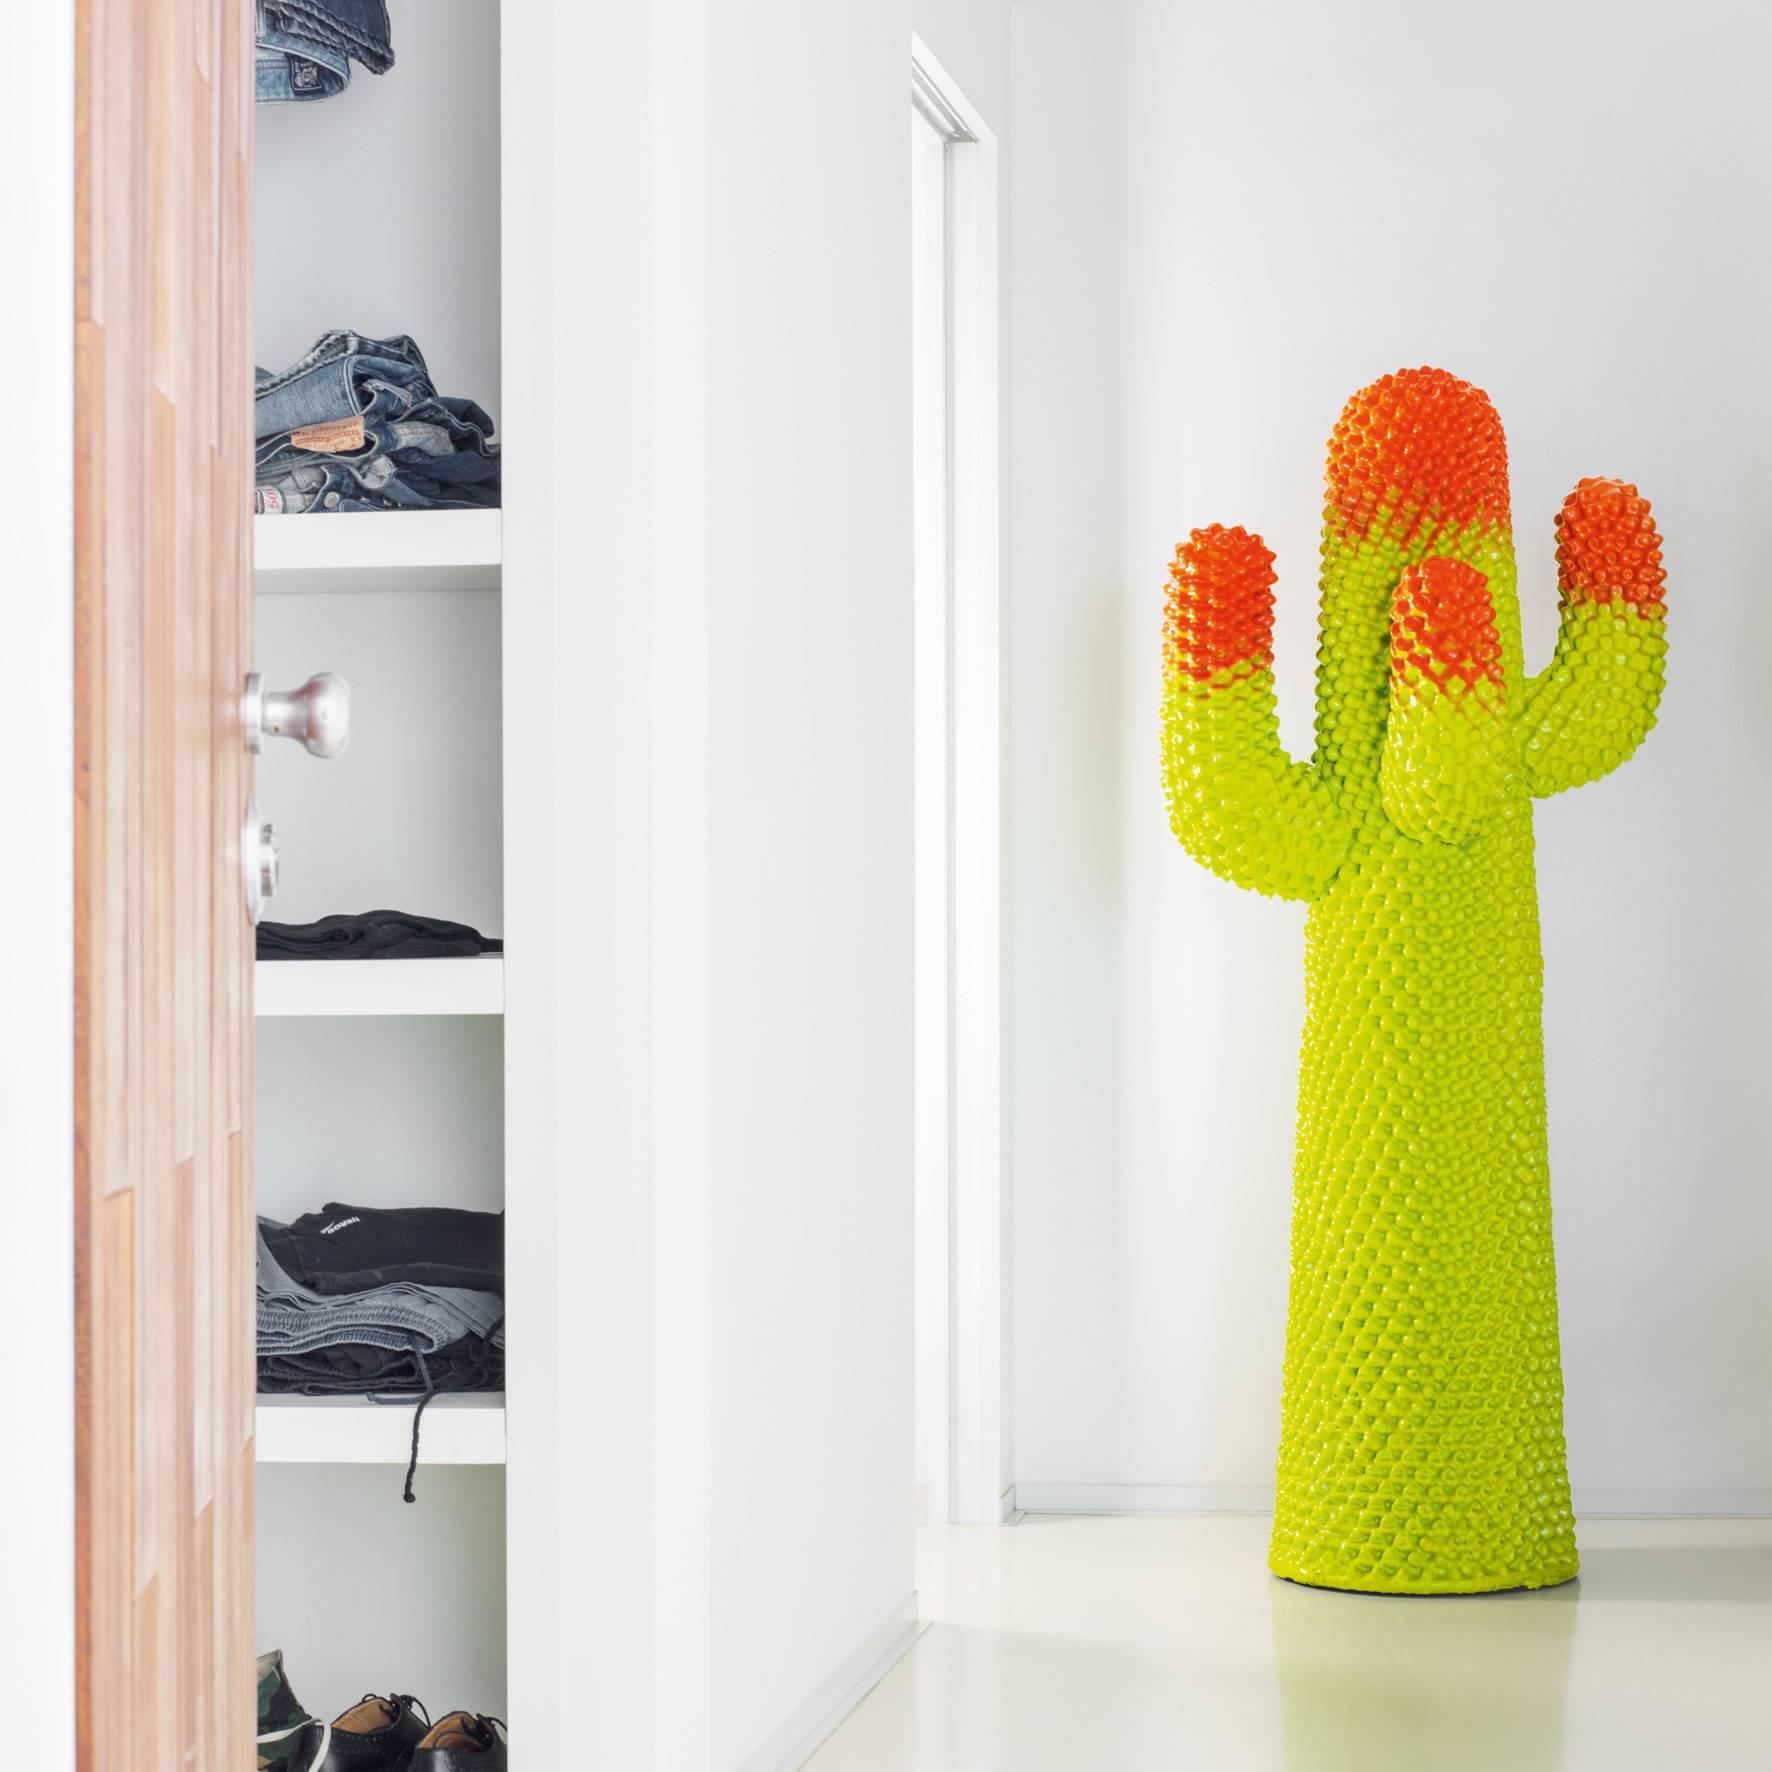 Designed in 1972 by Guido Drocco and Franco Mello, the 'Cactus' is one of Design's most iconic items. In 2012, on the occasion of its fortieth anniversary, the coat hanger was presented in a new limited edition of 300 pieces. The 'Metacactus'